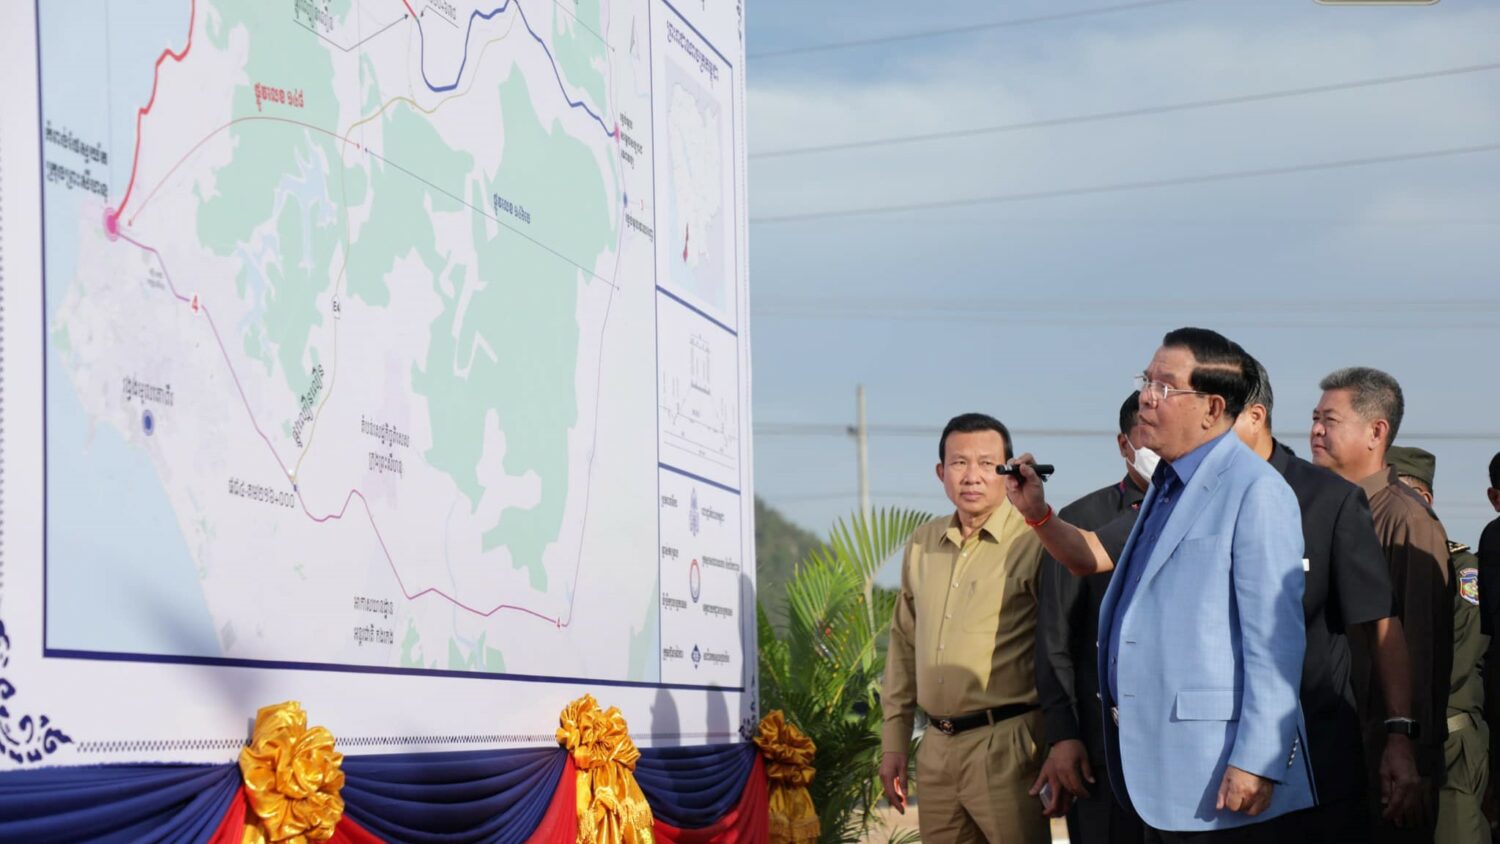 Prime Minister Hun Sen ponders a map of Preah Sihanouk province during the inauguration of a new road, in a photo posted to his Facebook page on December 22, 2022.